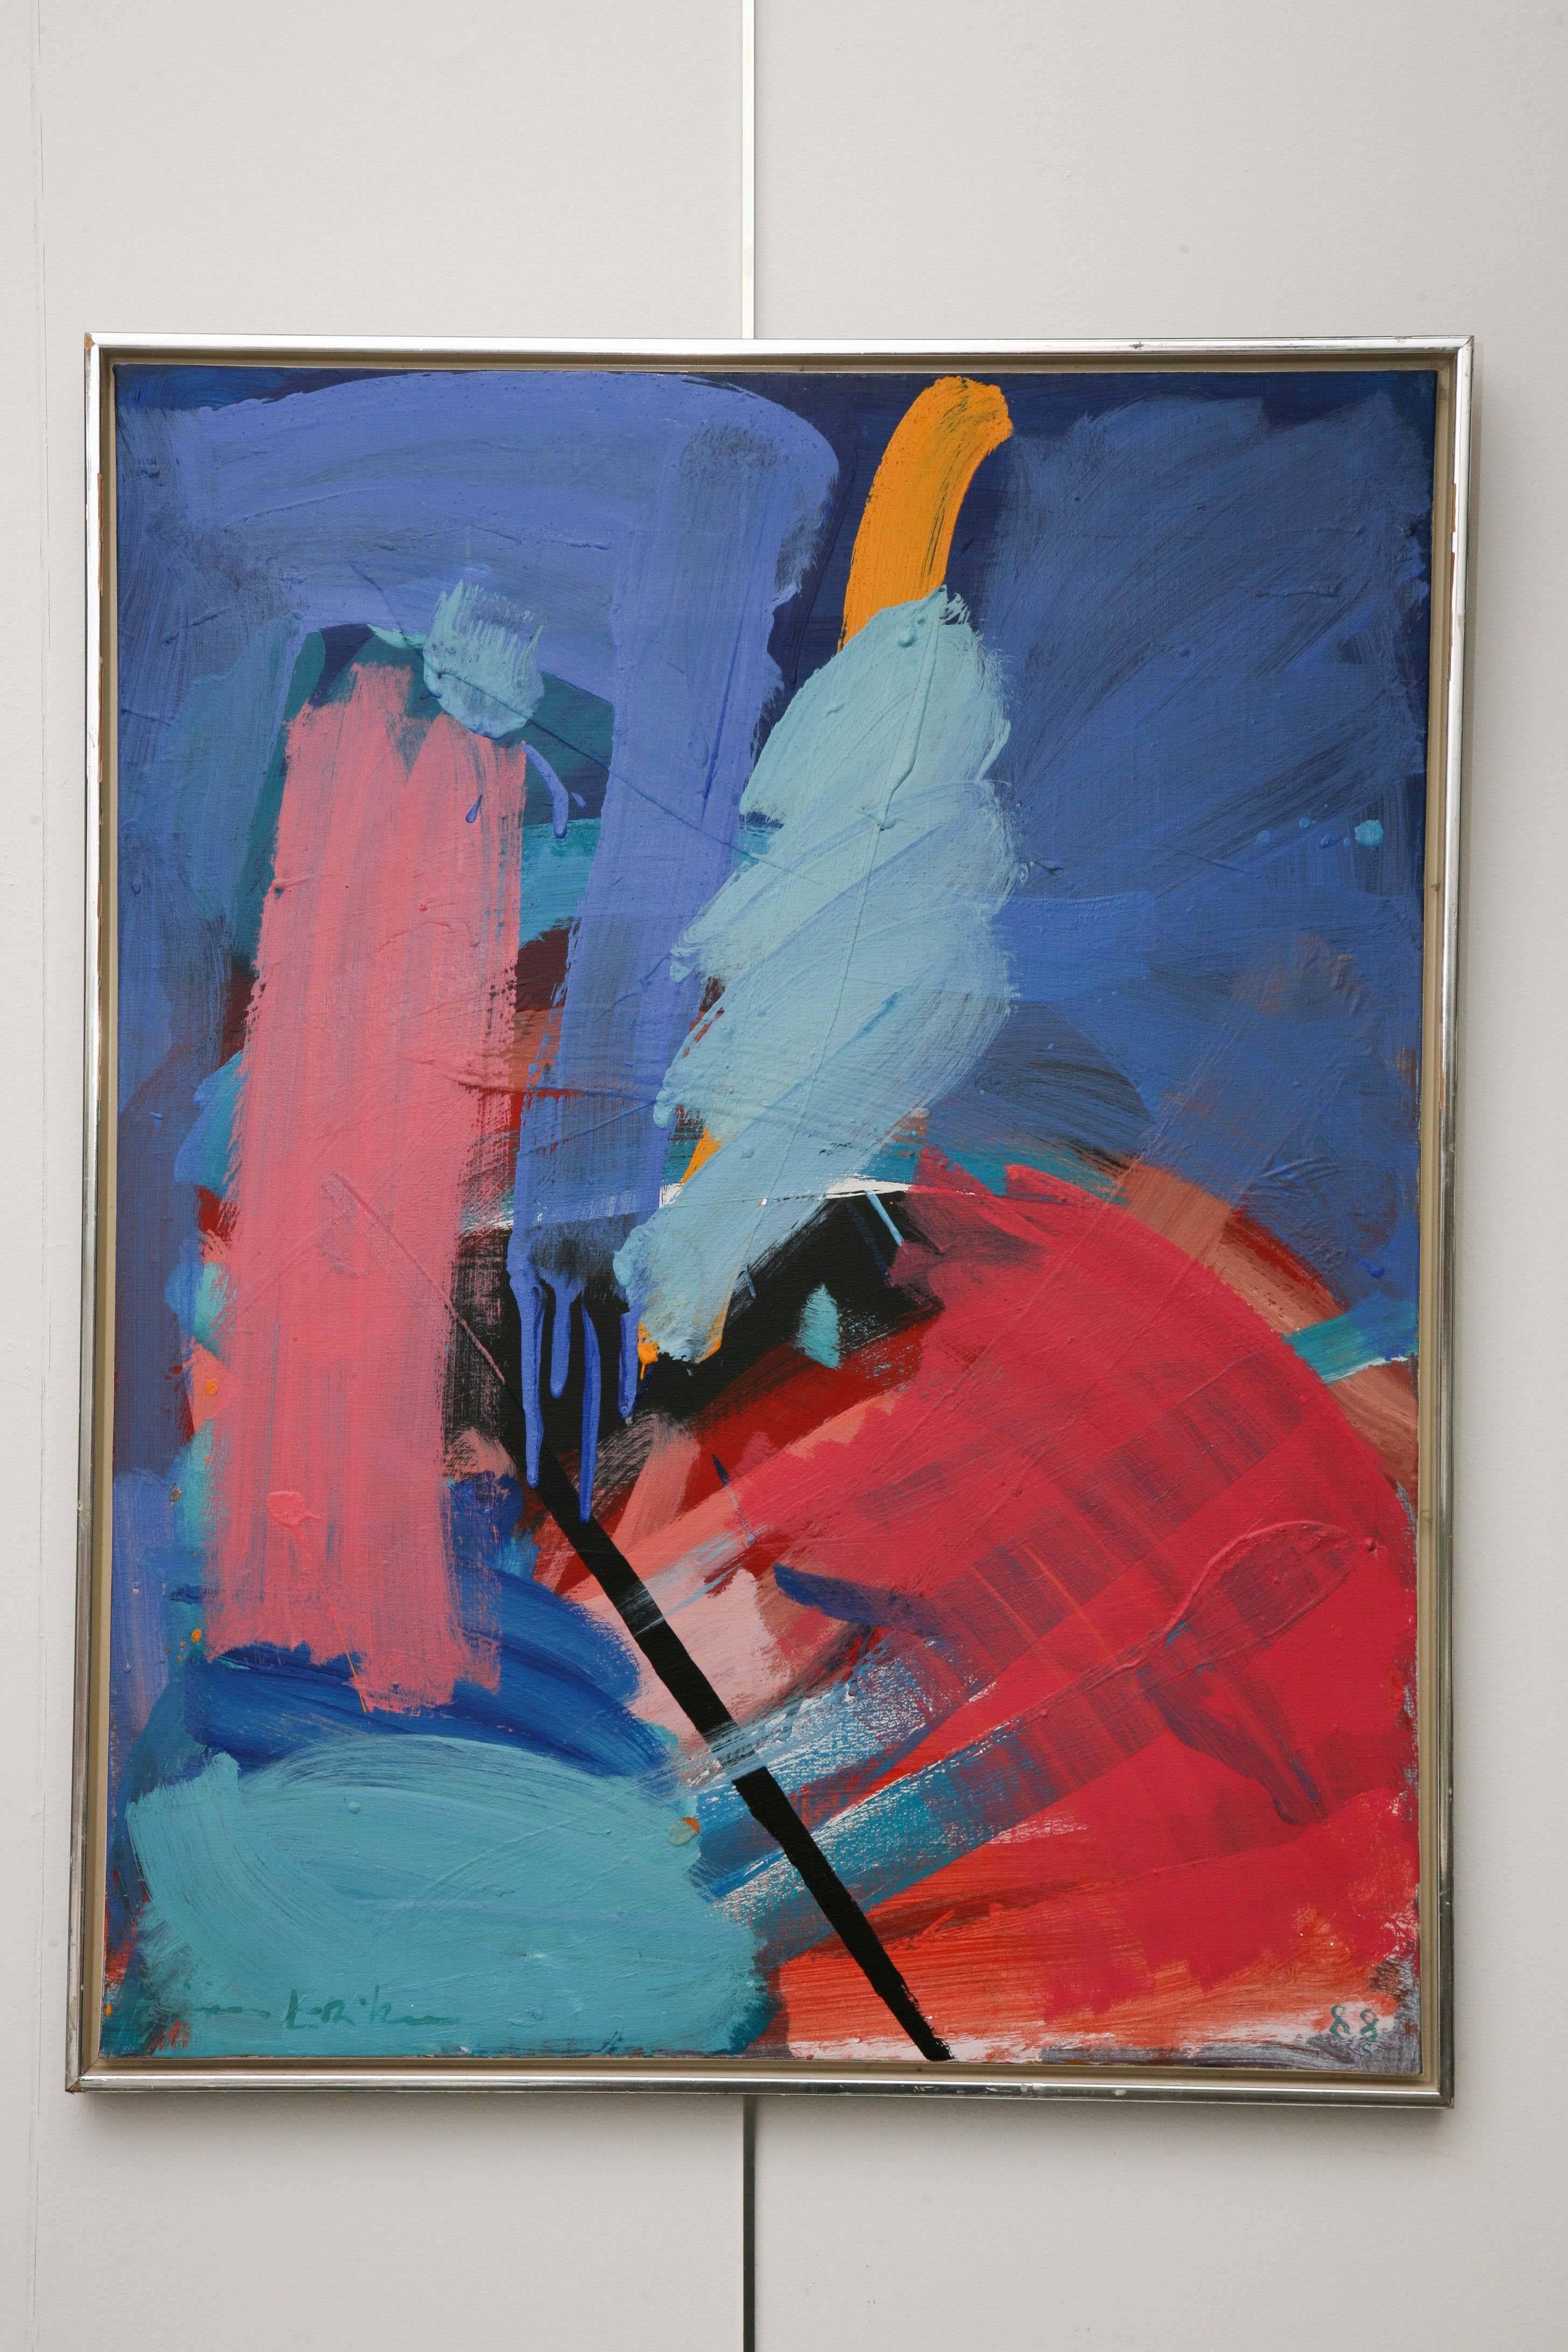 Danish abstract composition oil on canvas by Bjorn Erickson, 1988.
Signed on front of canvas and original silver frame
Measures: 29in W x 36.75 in H x 2 in D.